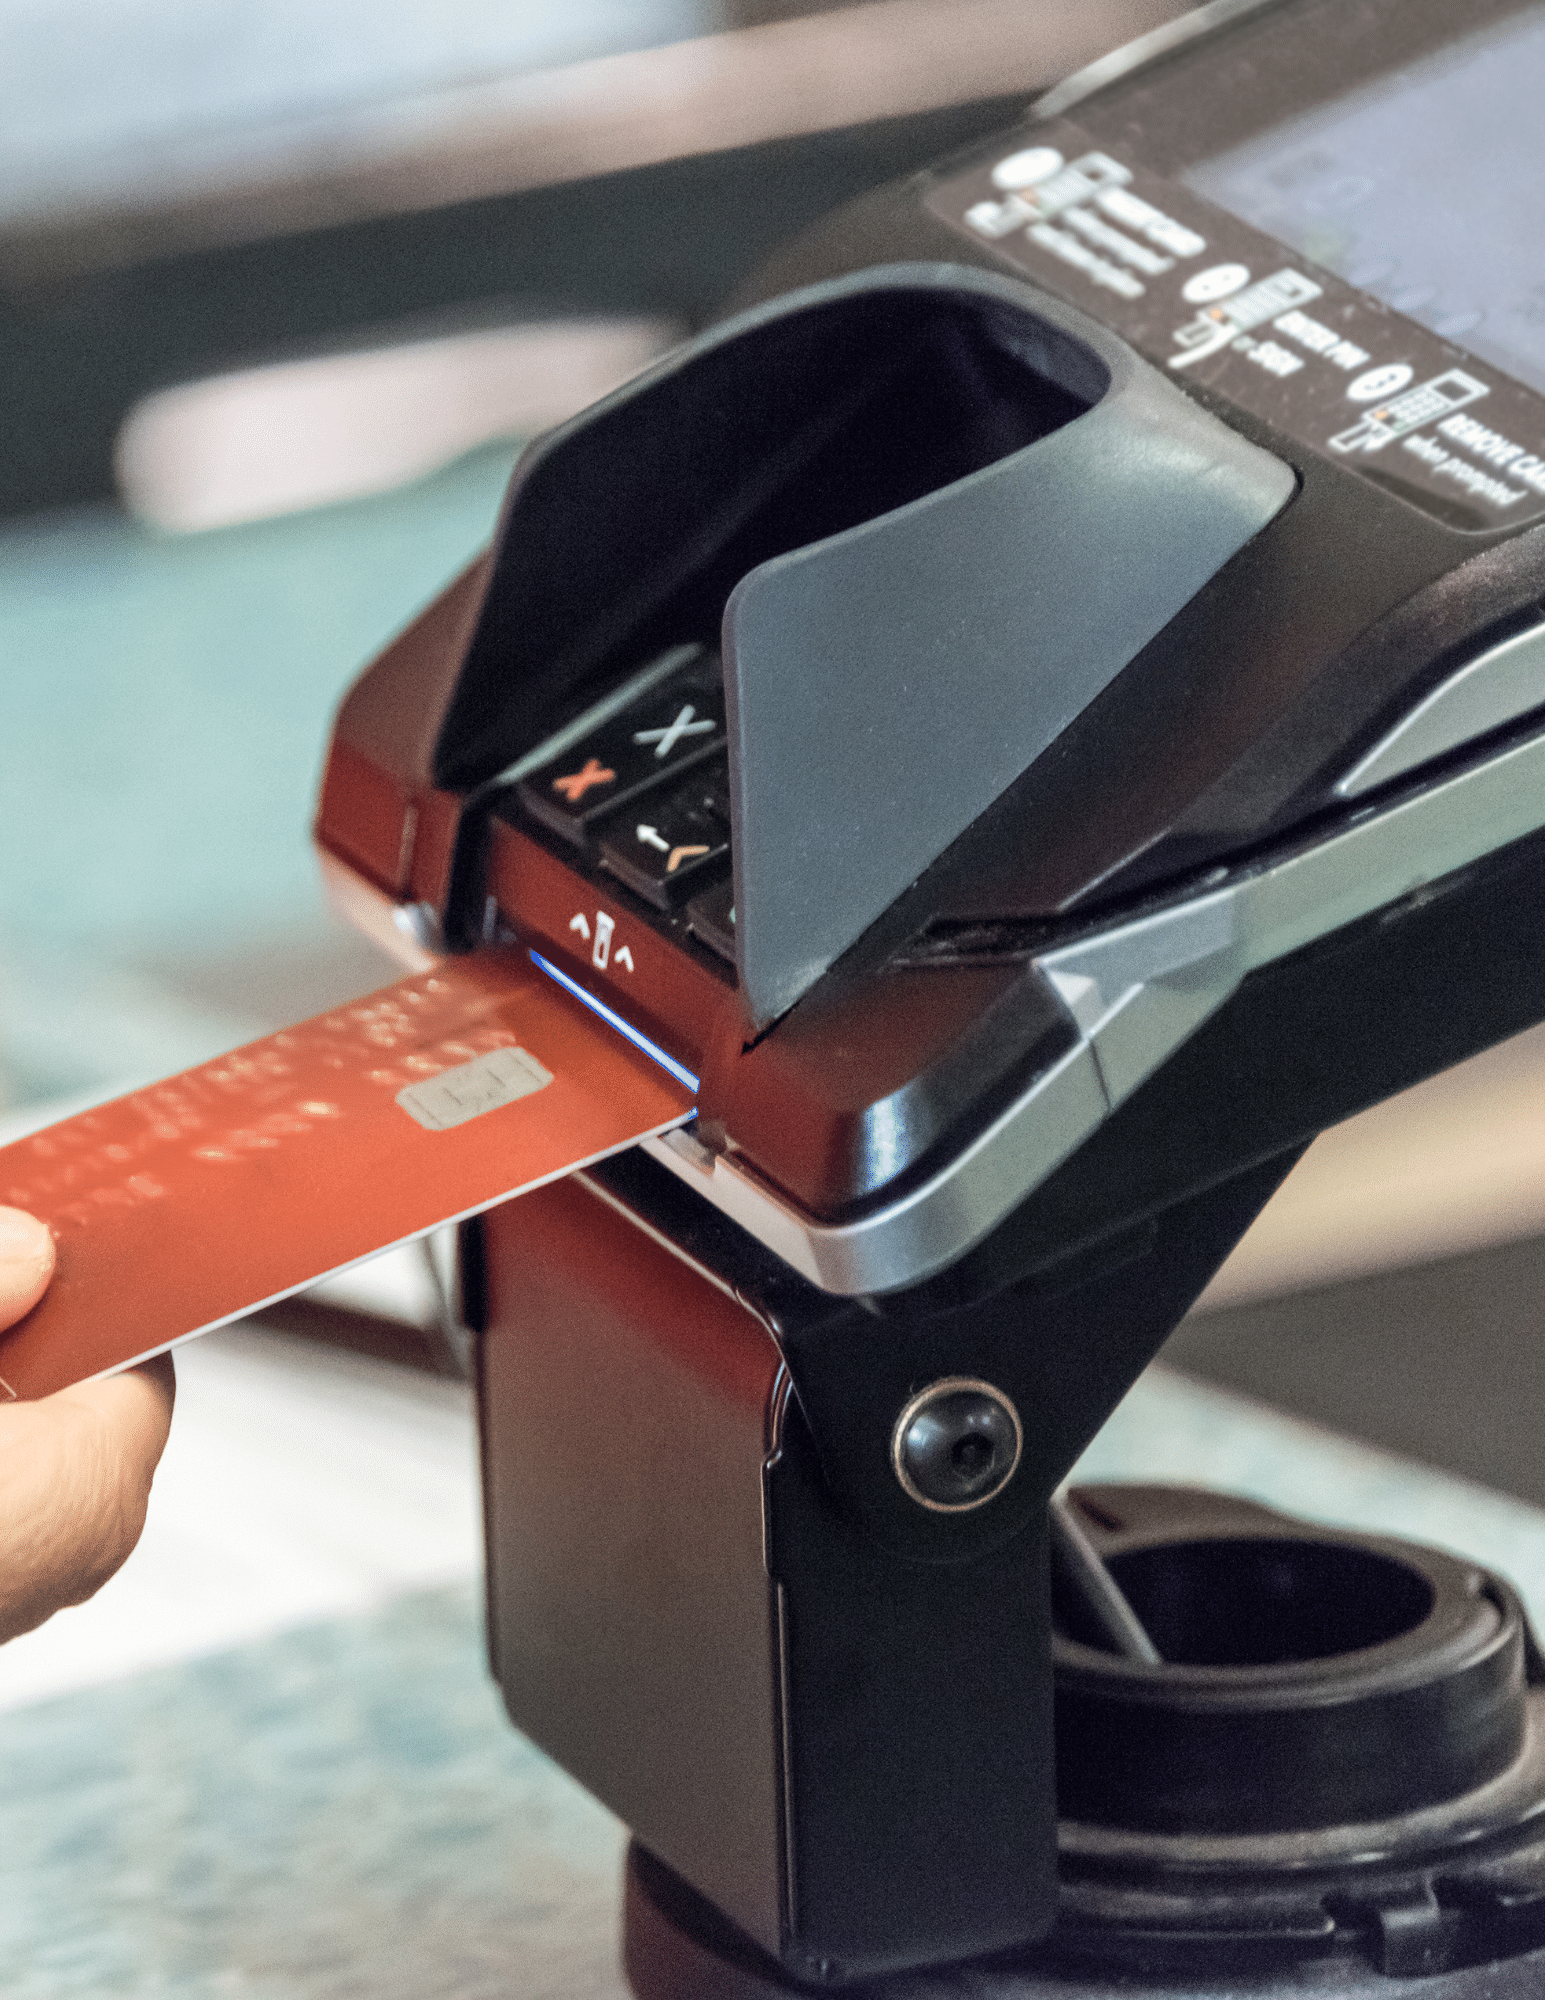 Close up of a debit transaction on payment processing machine, red card going into the bottom